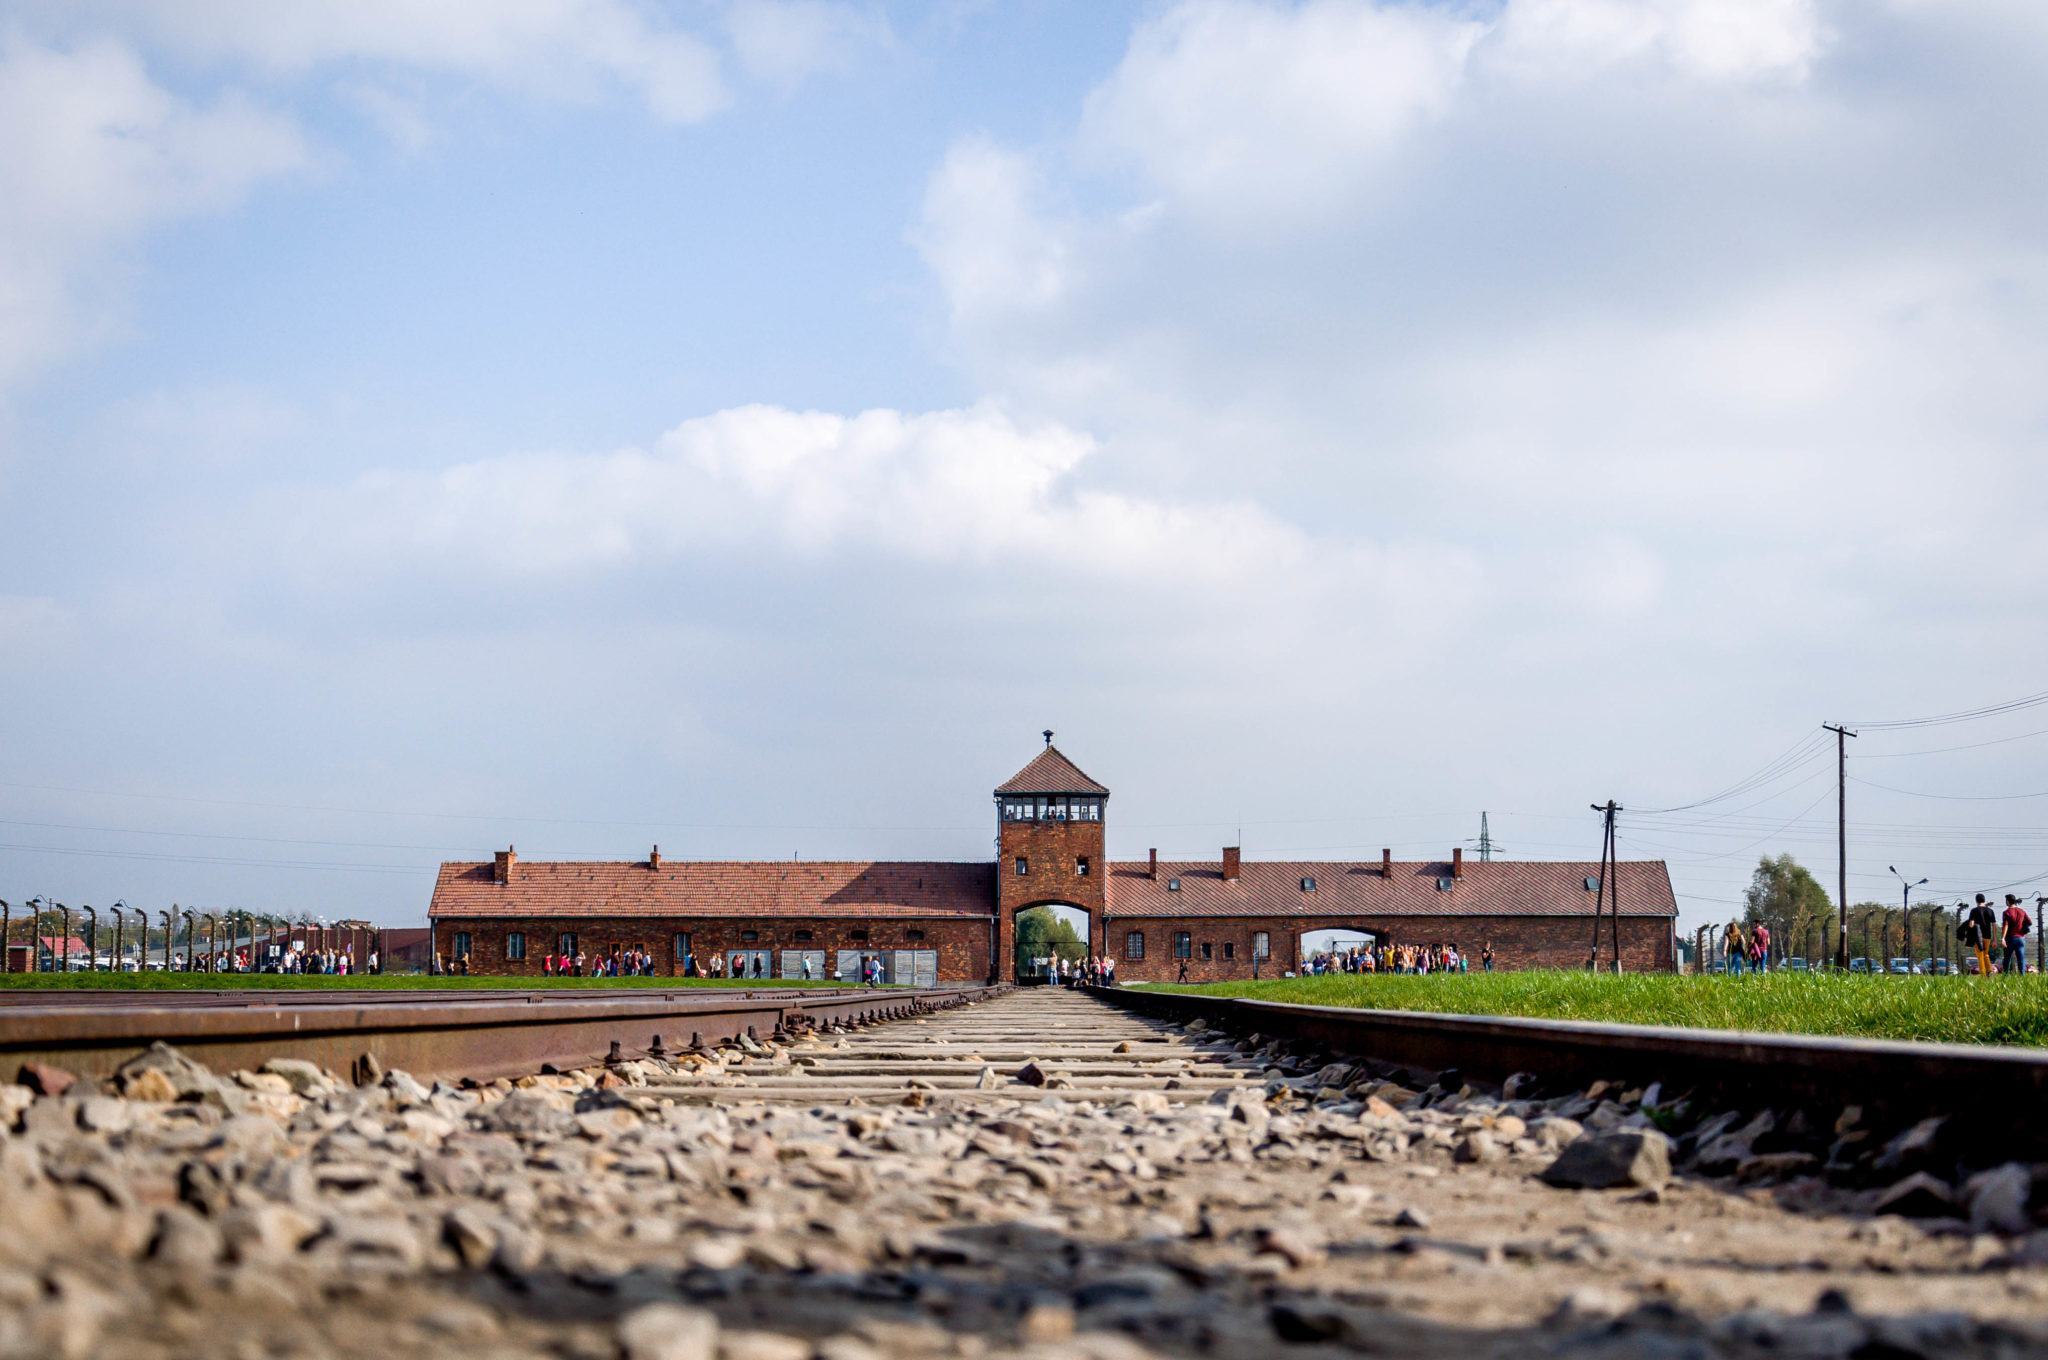 The arrival platforms at the Auschwitz-Birkenau concentration and extermination camp